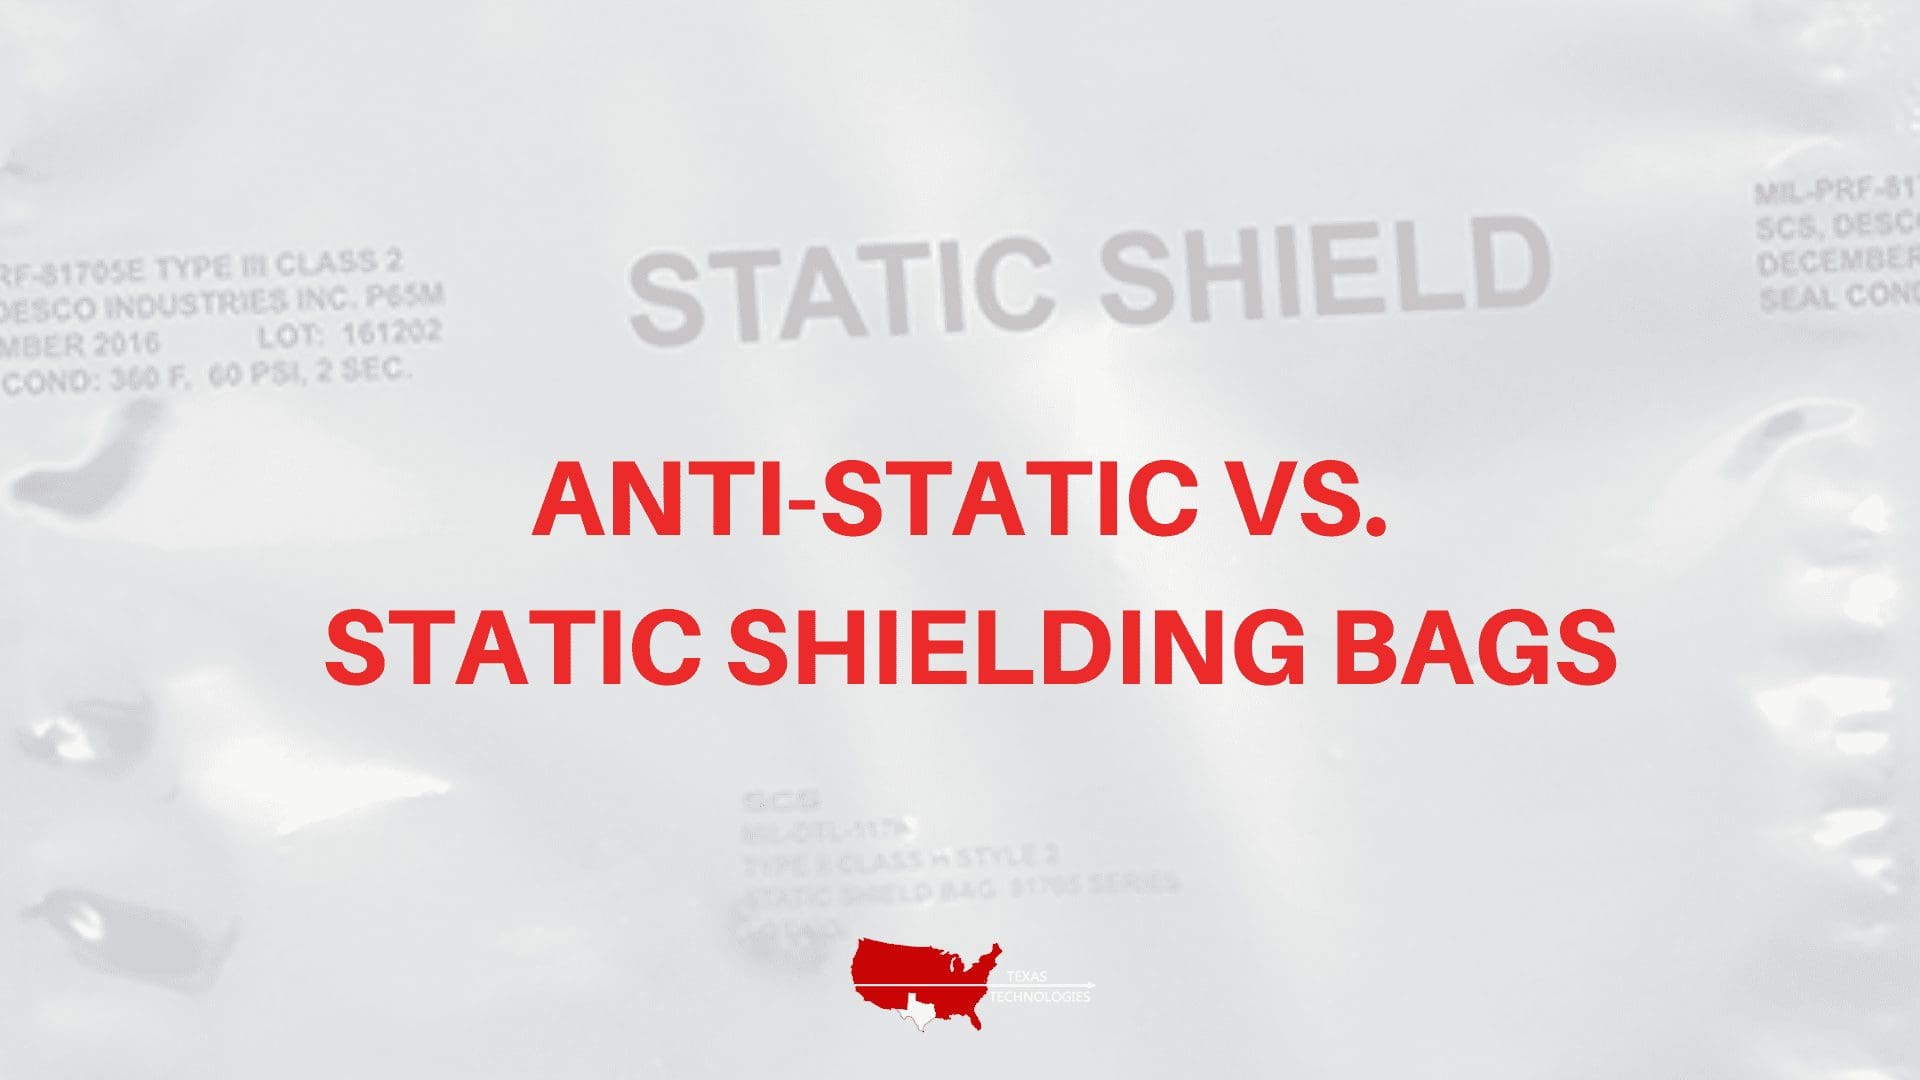 What’s the Difference Between Anti-Static and Static Shielding Bags?